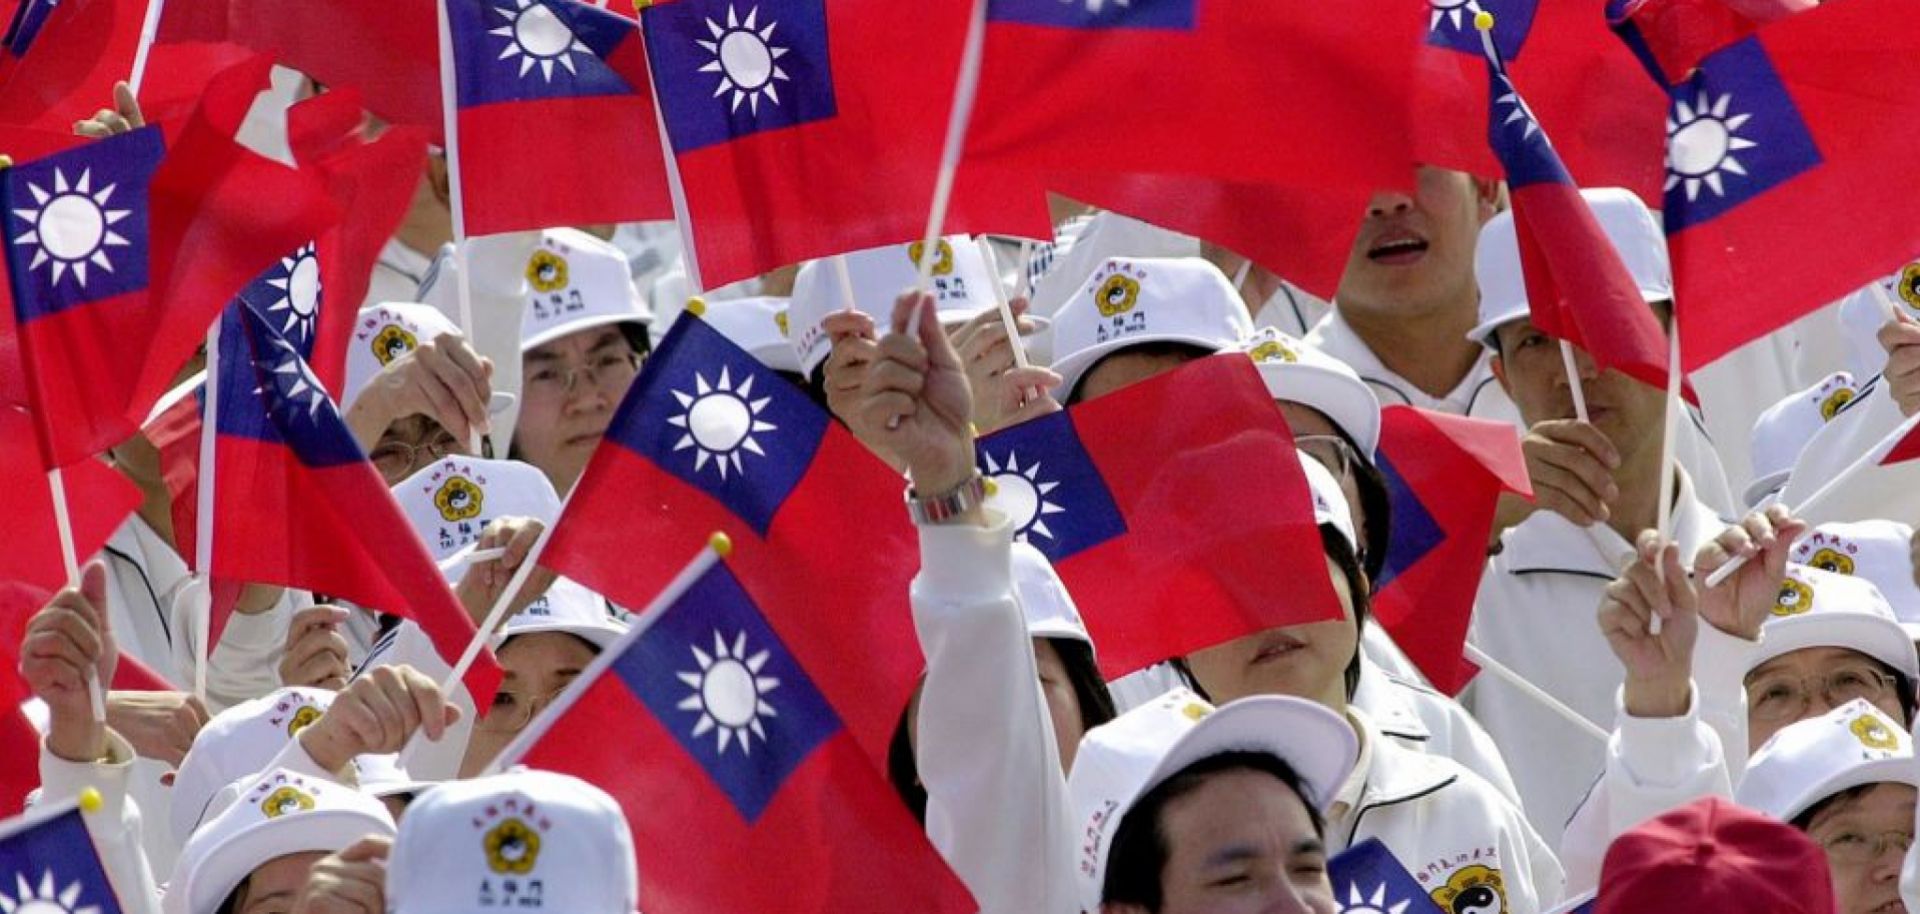 National Day celebrations on Oct. 10, 2004, in Taipei, Taiwan.